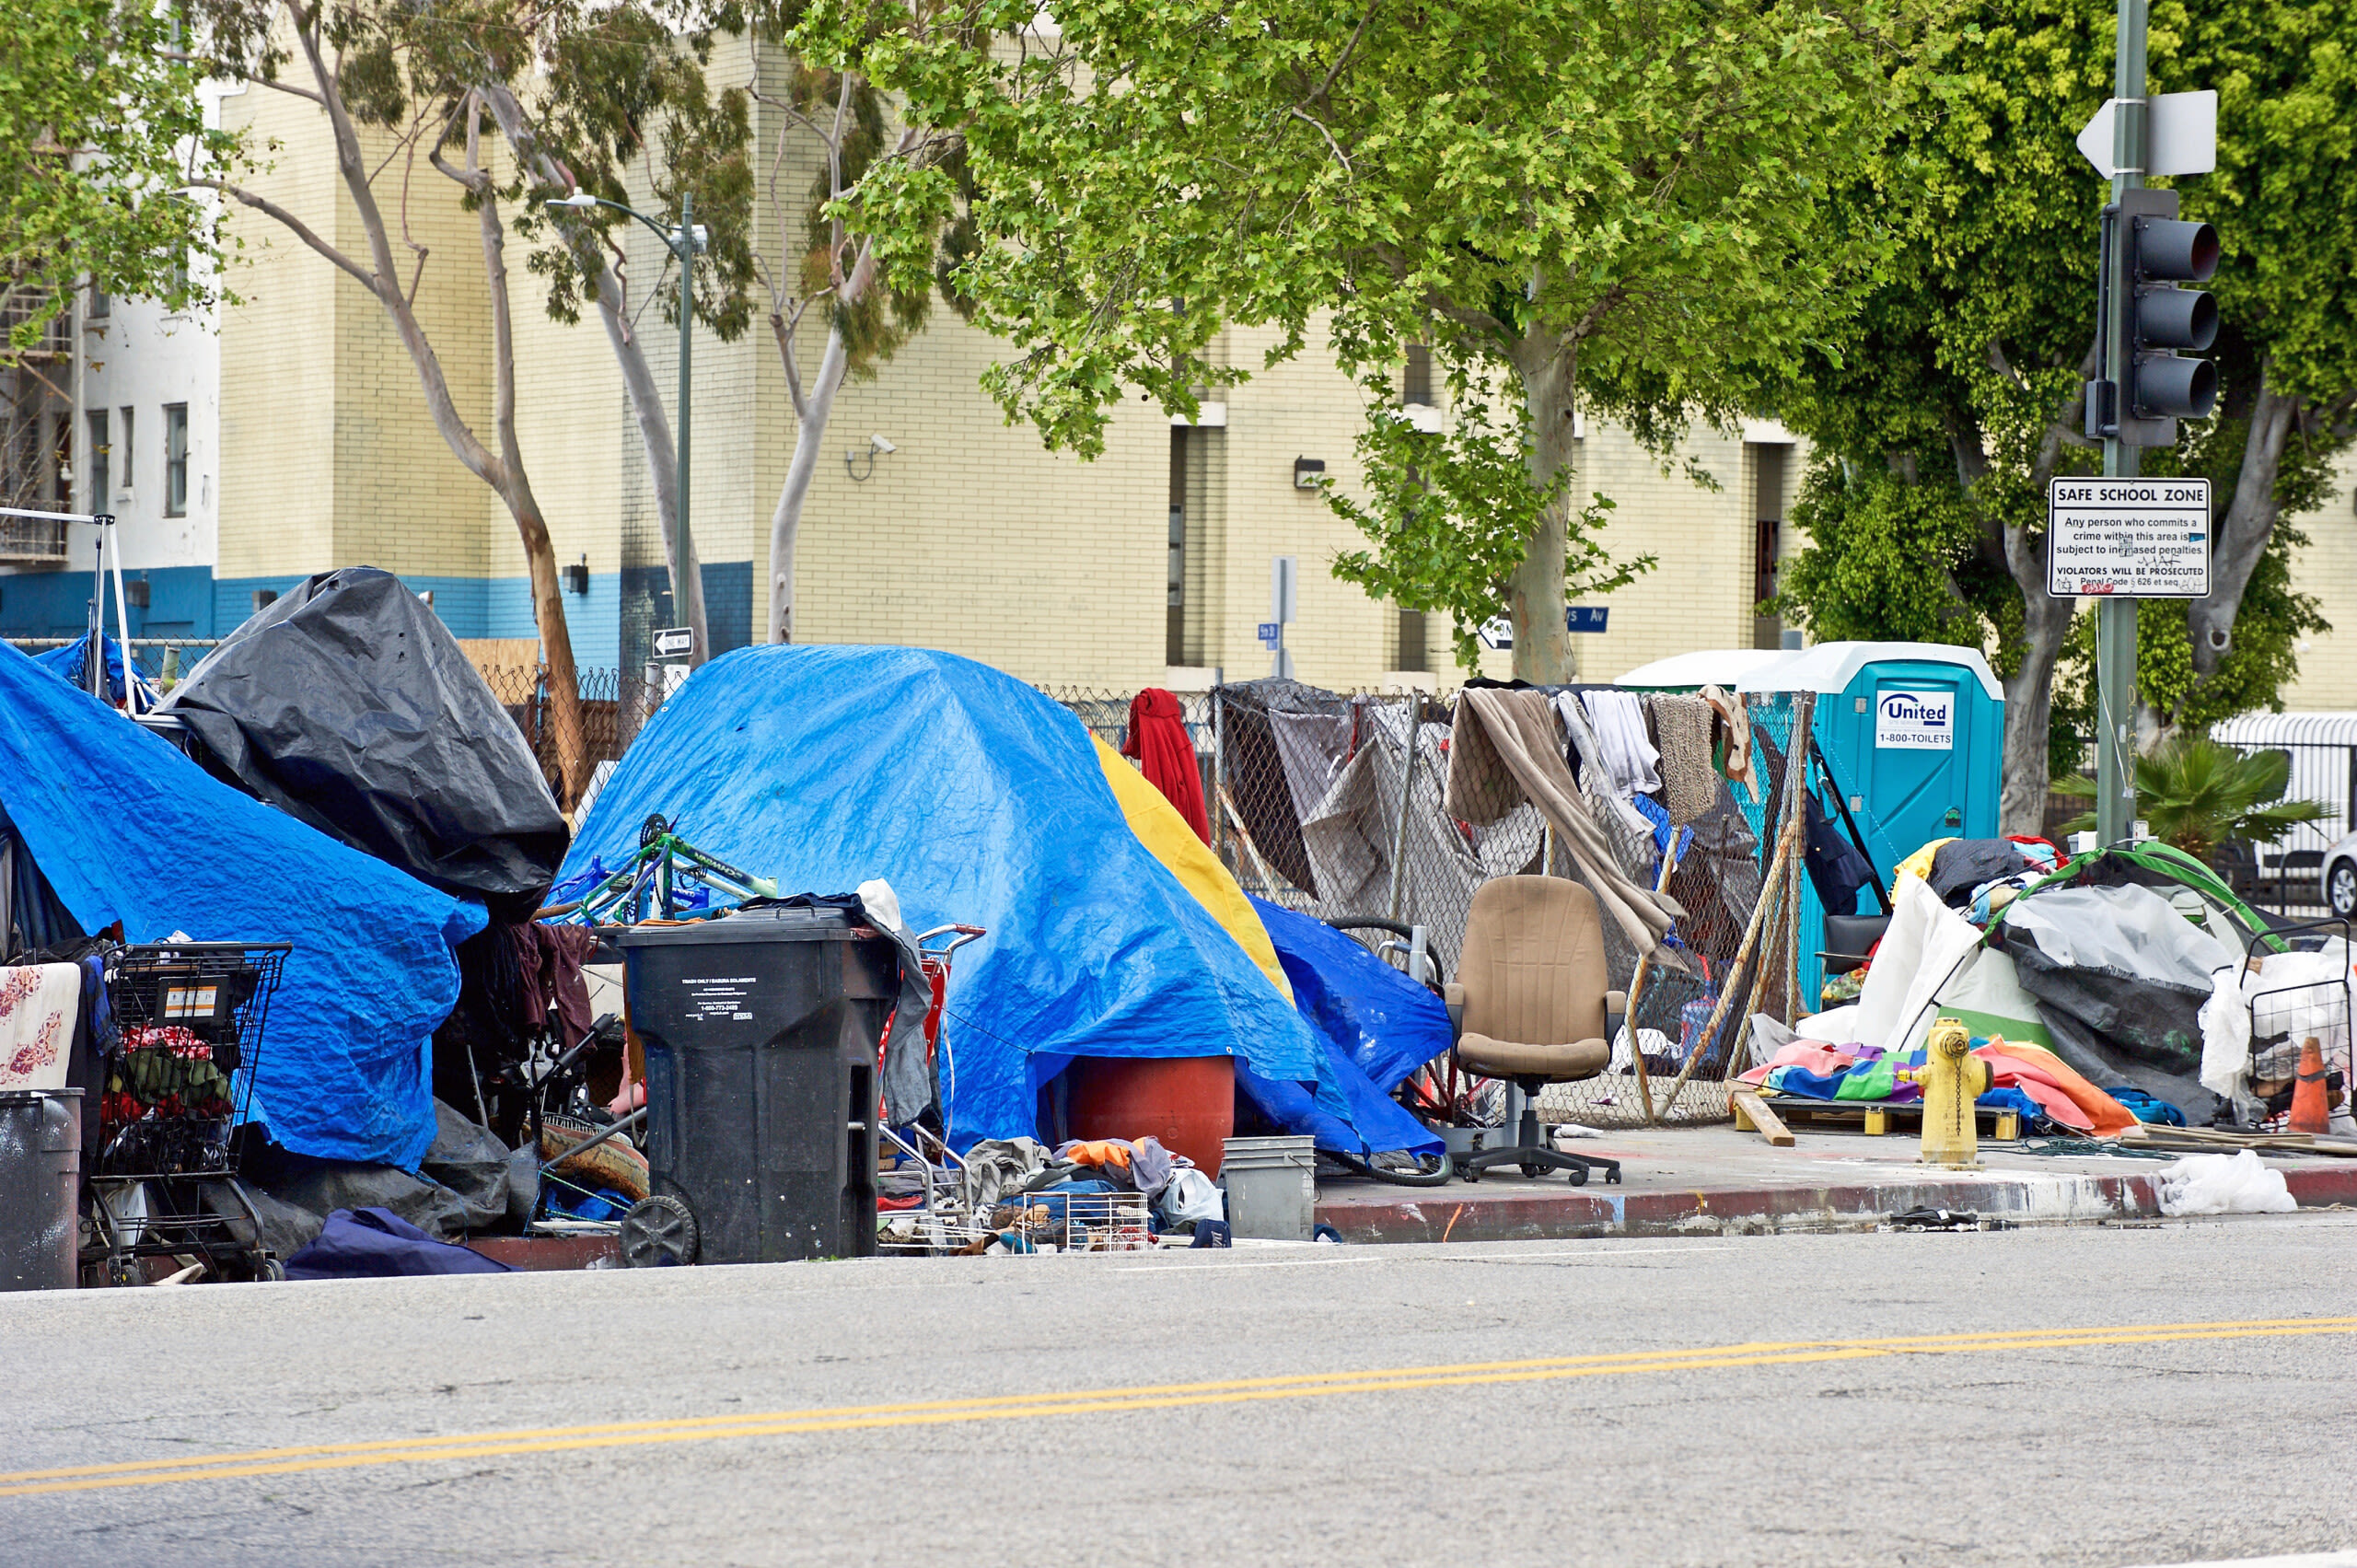 Supreme Court to Clarify Homelessness Rules - The American Spectator | USA News and Politics